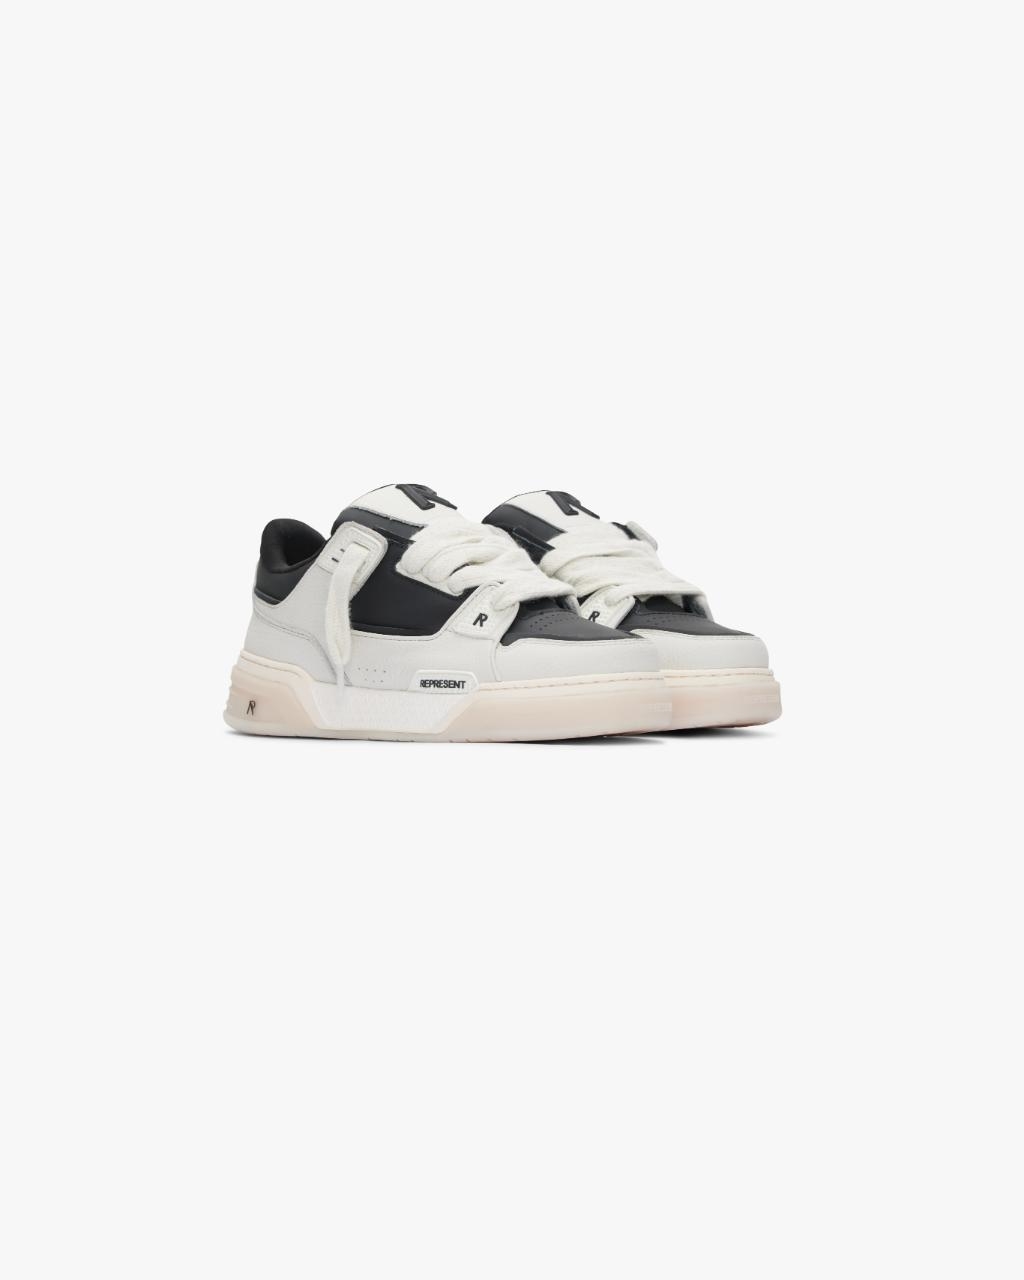 Givenchy sneakers with black and white design, low-top style, thick sole, displayed against a clear backdrop